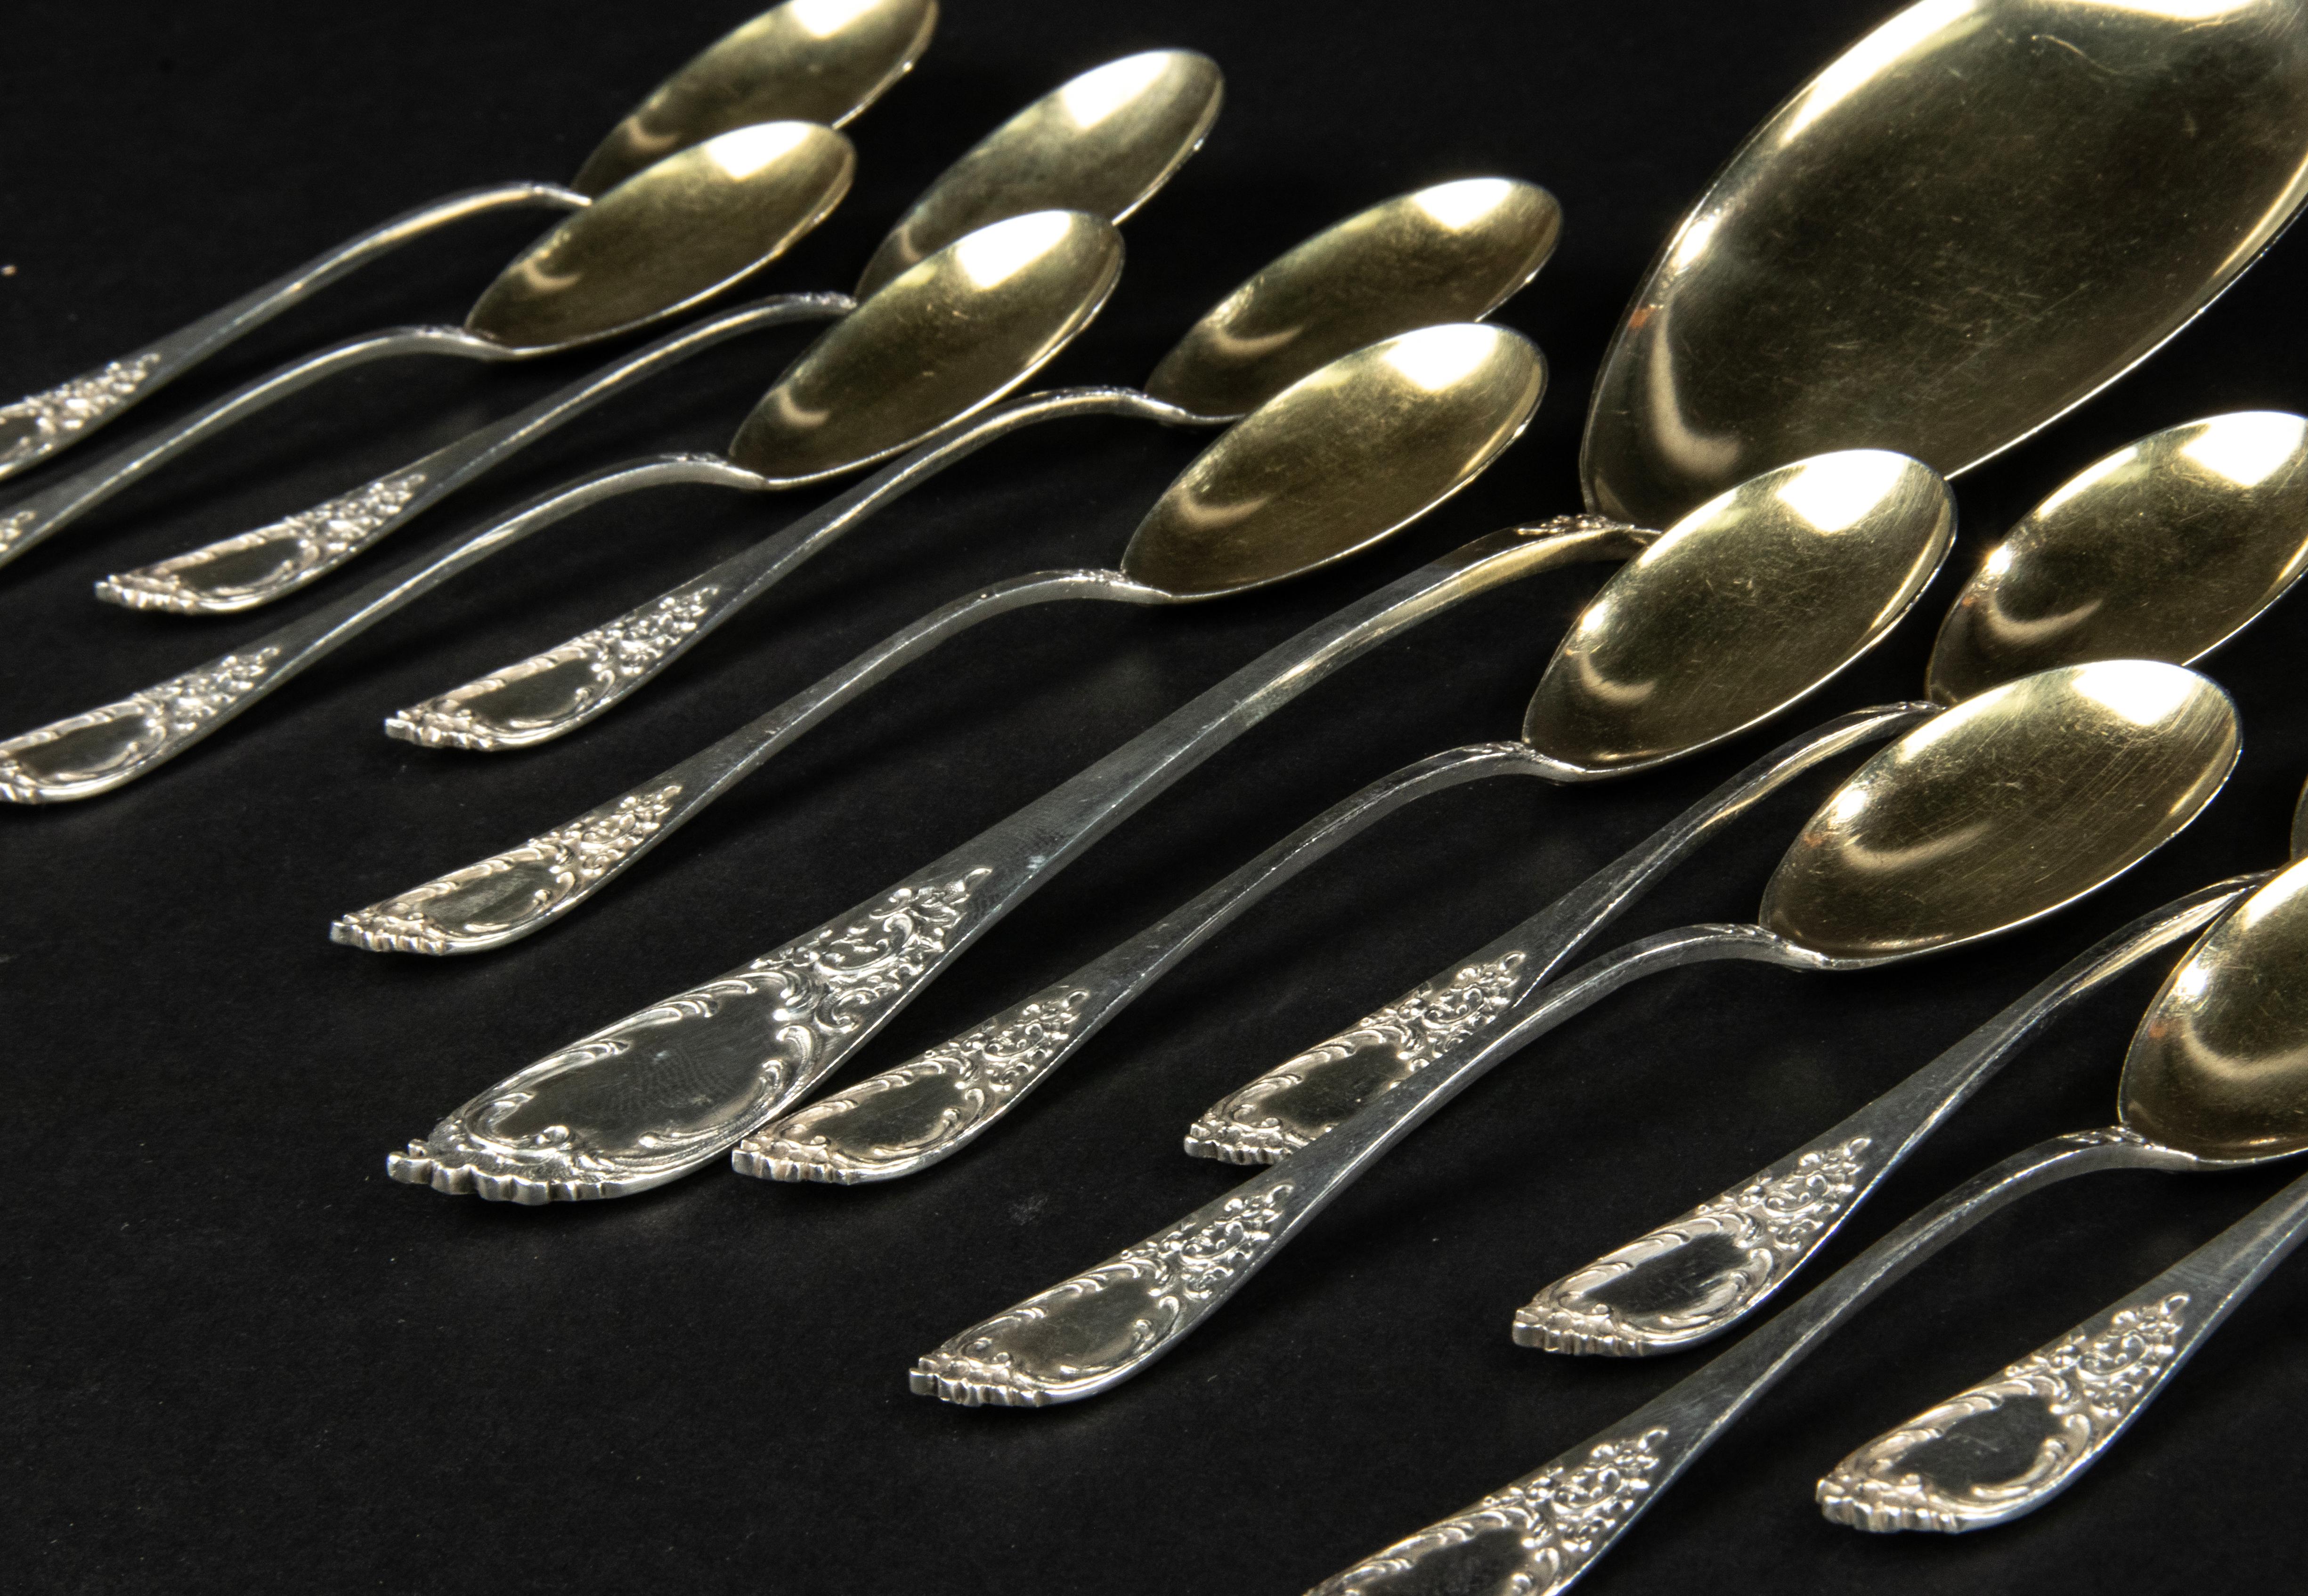 13-Piece Set of Solid Silver Ice Cream Spoons, Late 19th Century For Sale 6